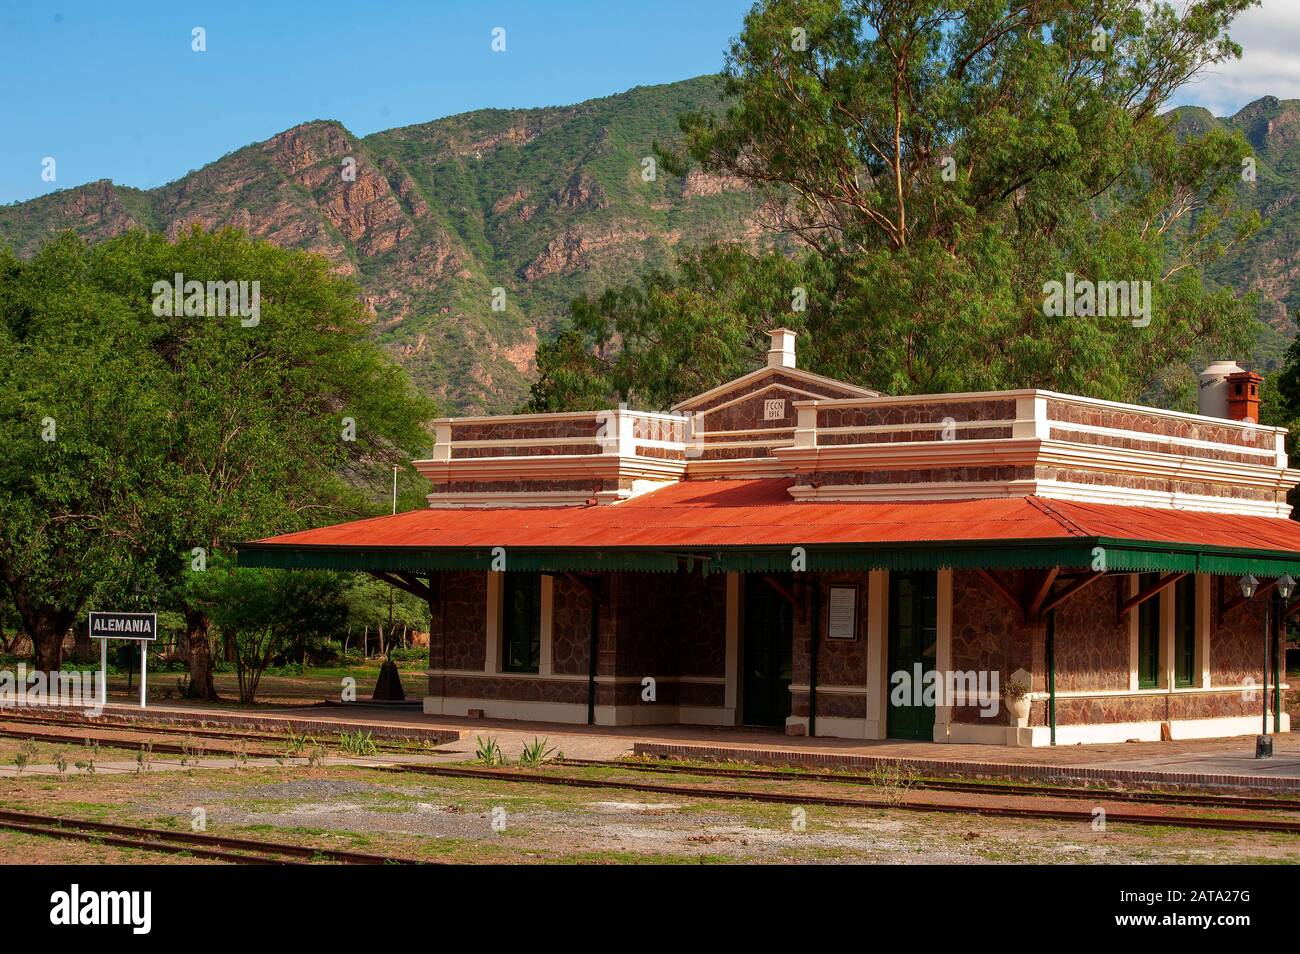 Railway Station at Alemania small town on the Ruta 68 going from Salta to Cafayate, Sanlta, Argentina Stock Photo